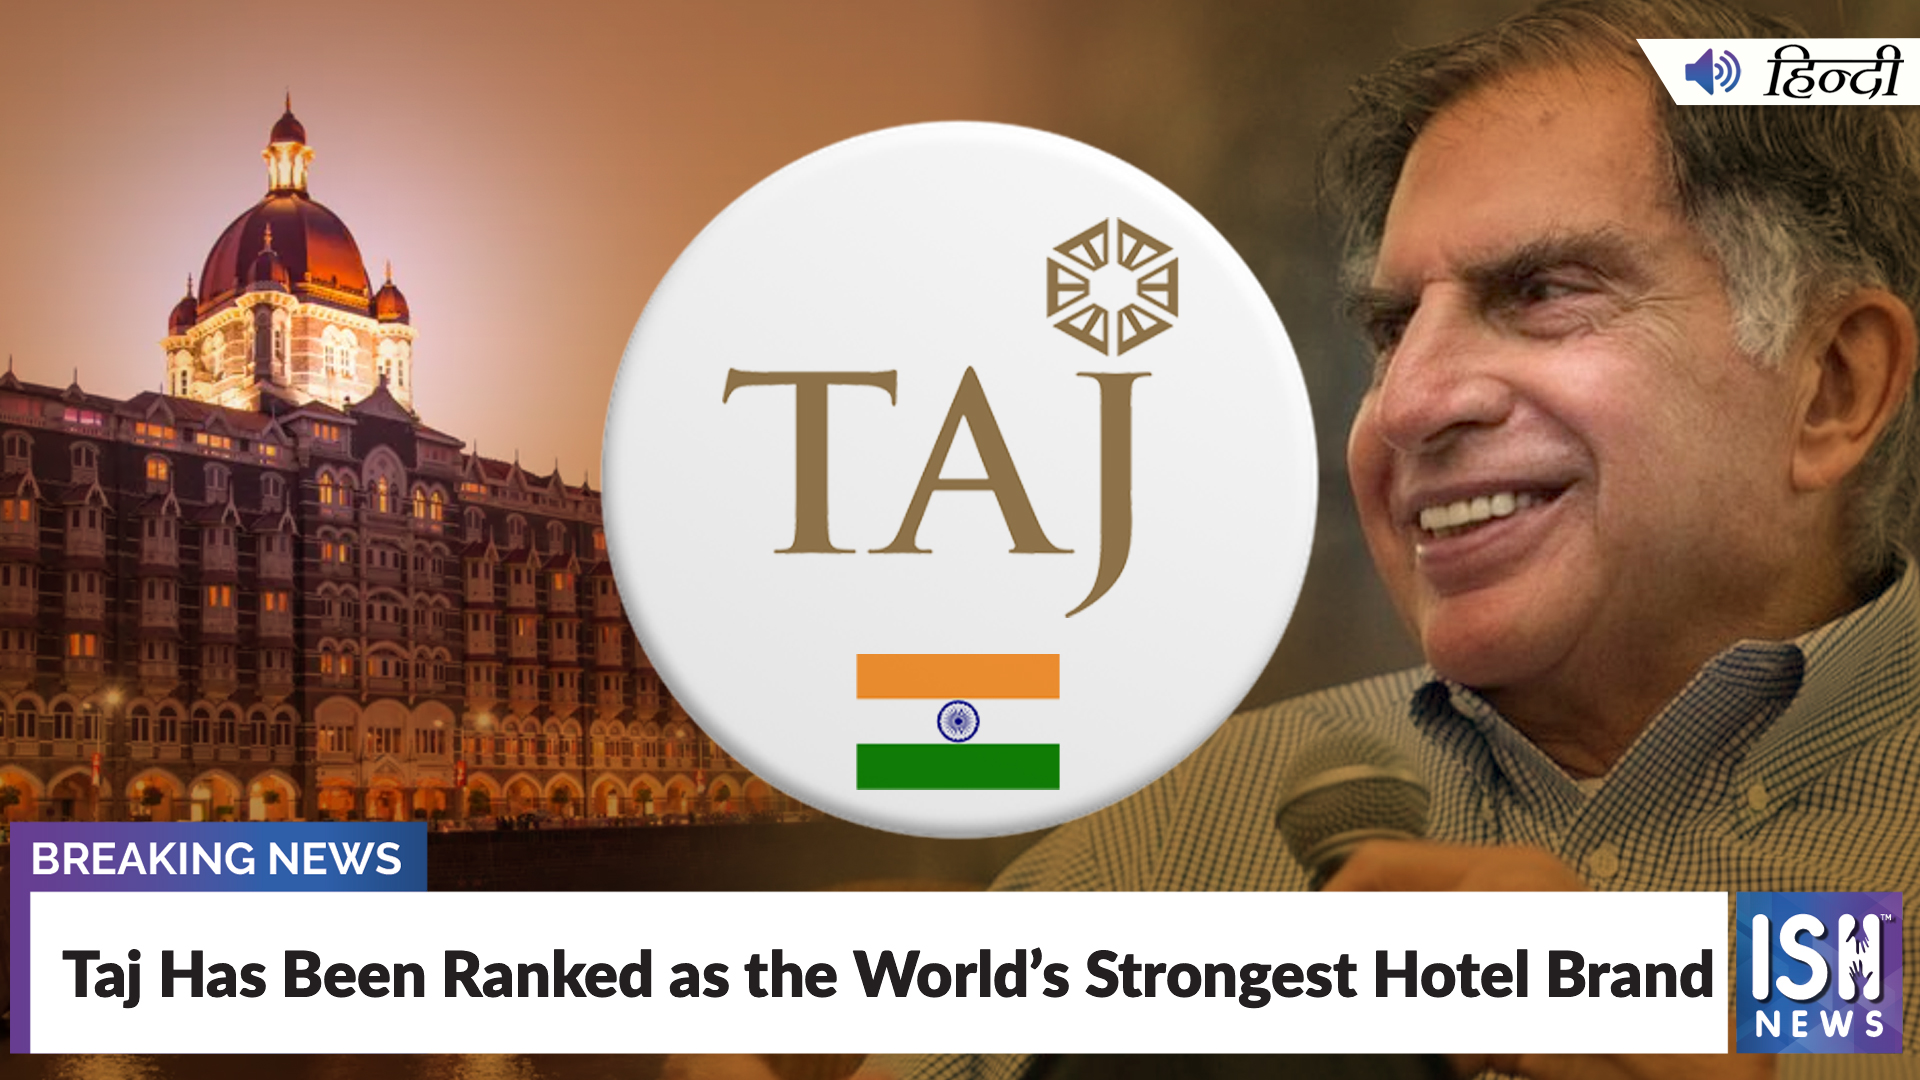 Taj Has Been Ranked As World’s Strongest Hotel Brand